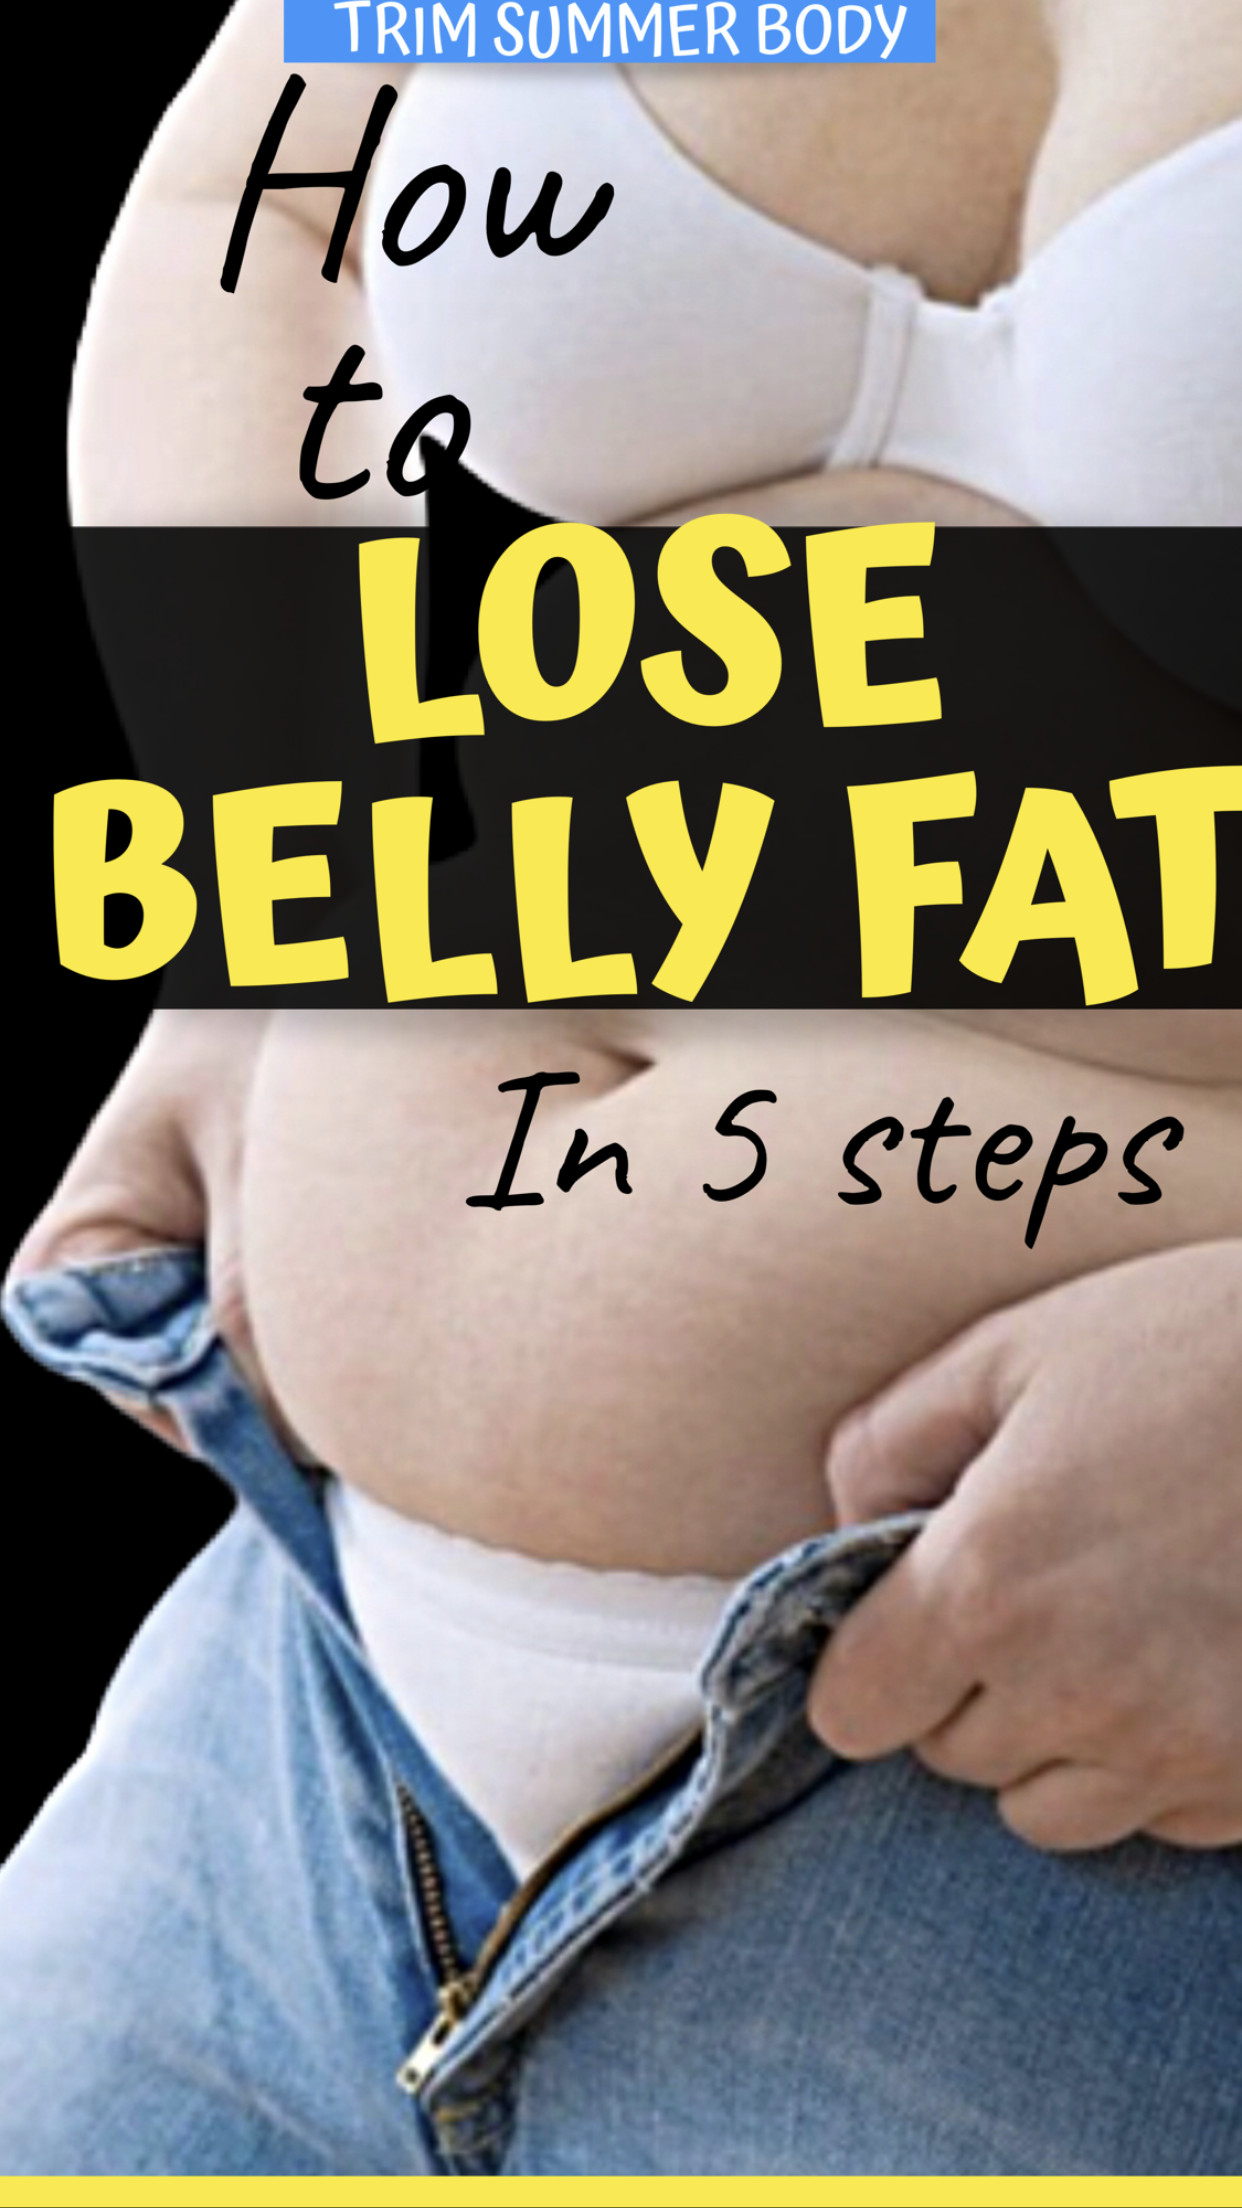 15 Best Design Ideas for How to Lose Belly Fat Fast In A Week for Teens ...